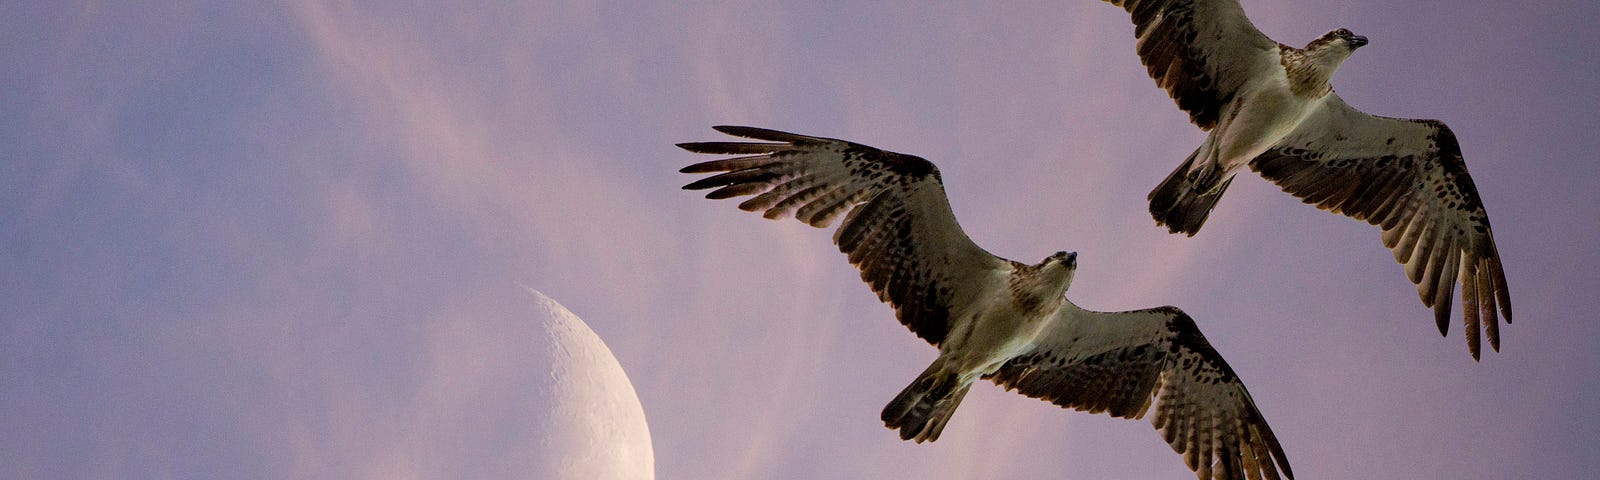 Two large birds soaring against a purple sky, with a half-moon rising.